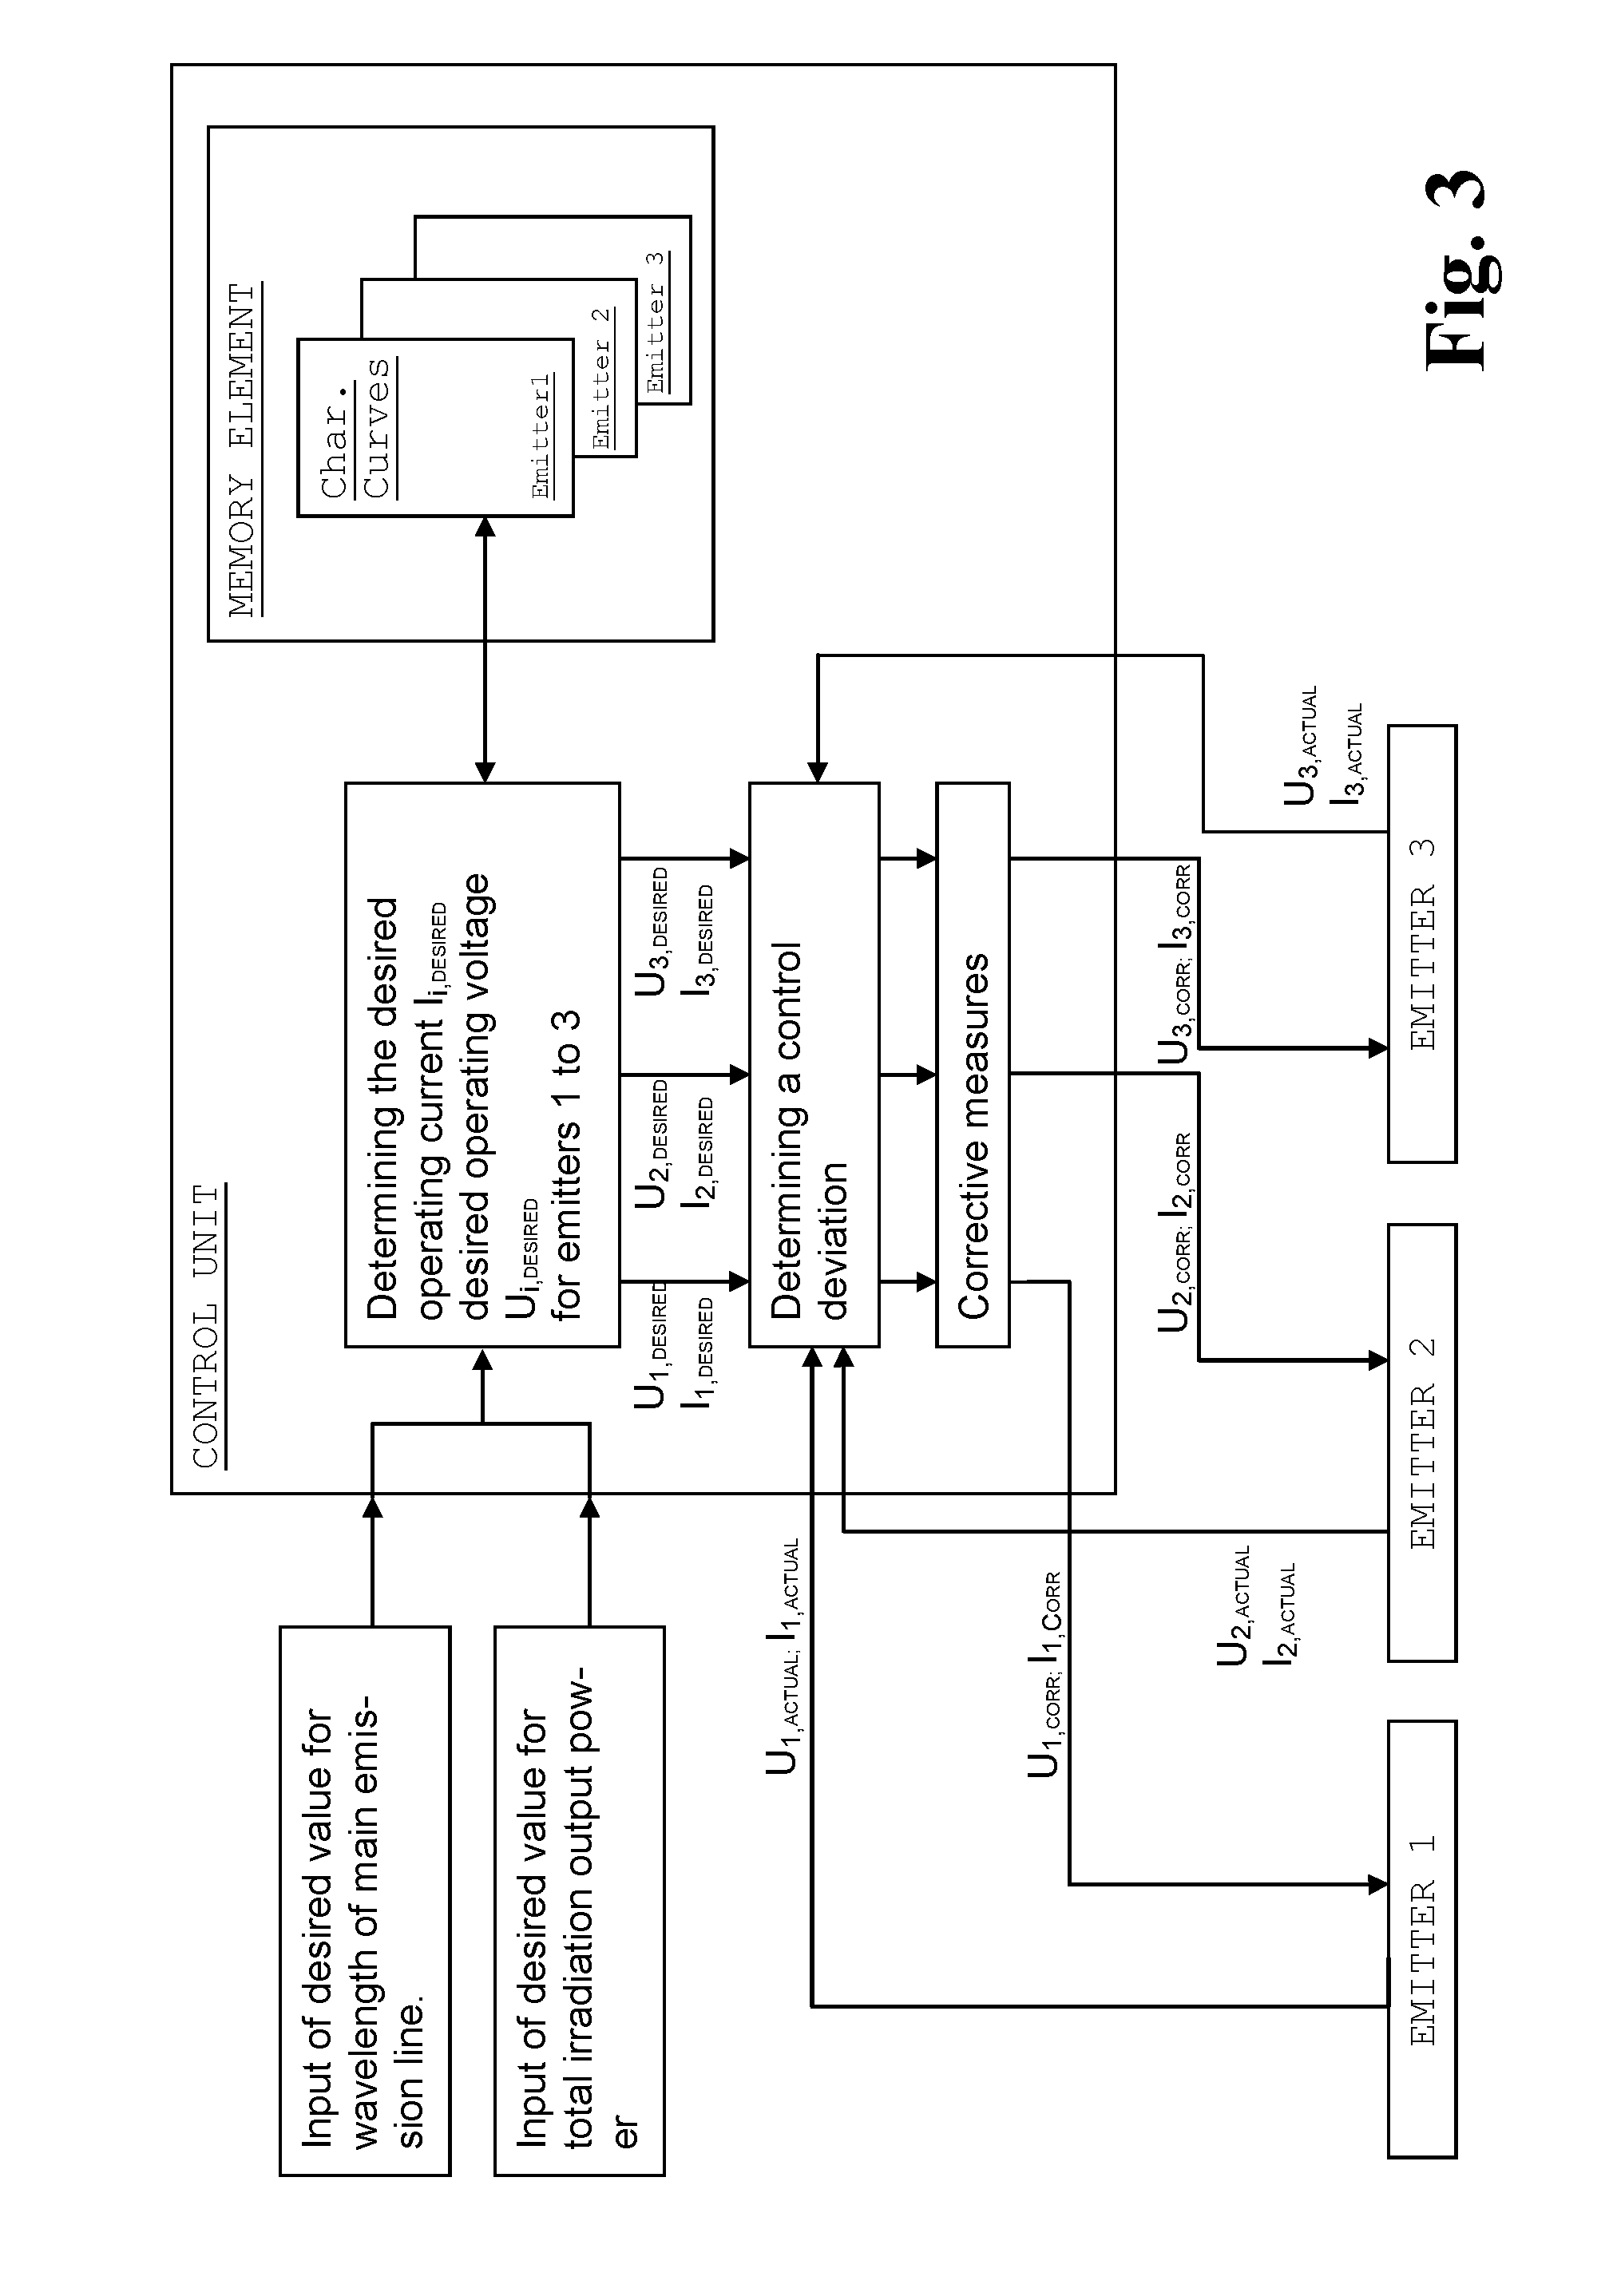 Operating method and device for irradiating a substrate